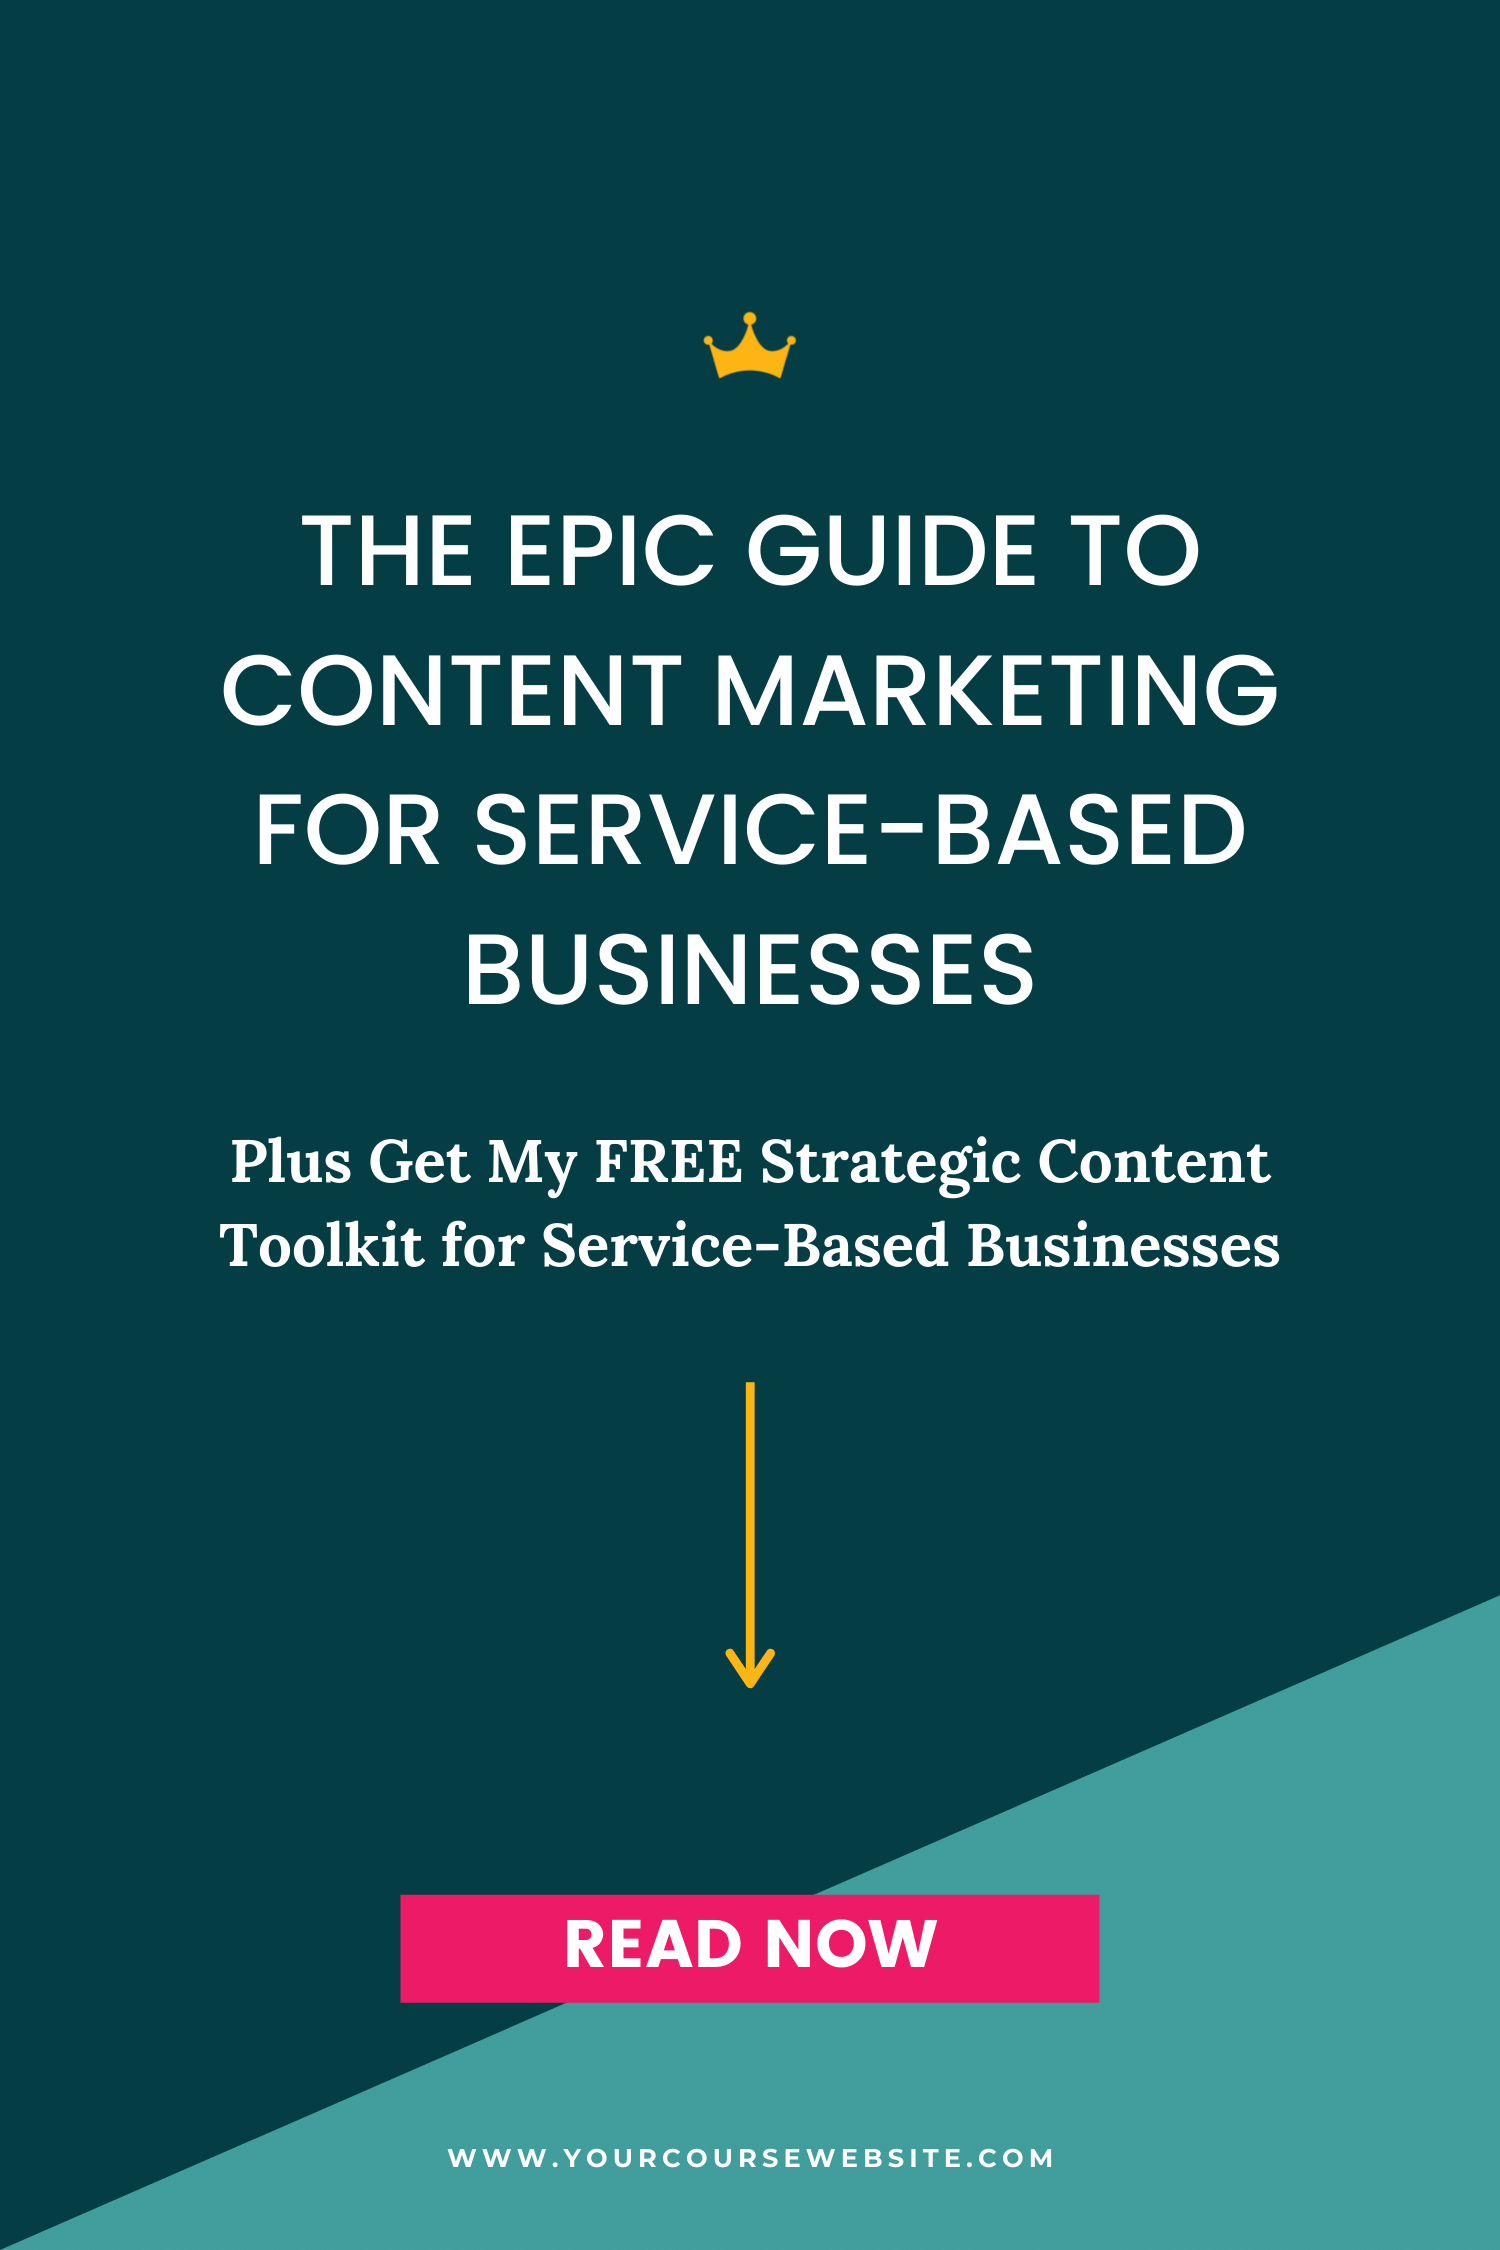 The Epic Guide to Content Marketing for Service-Based Businesses